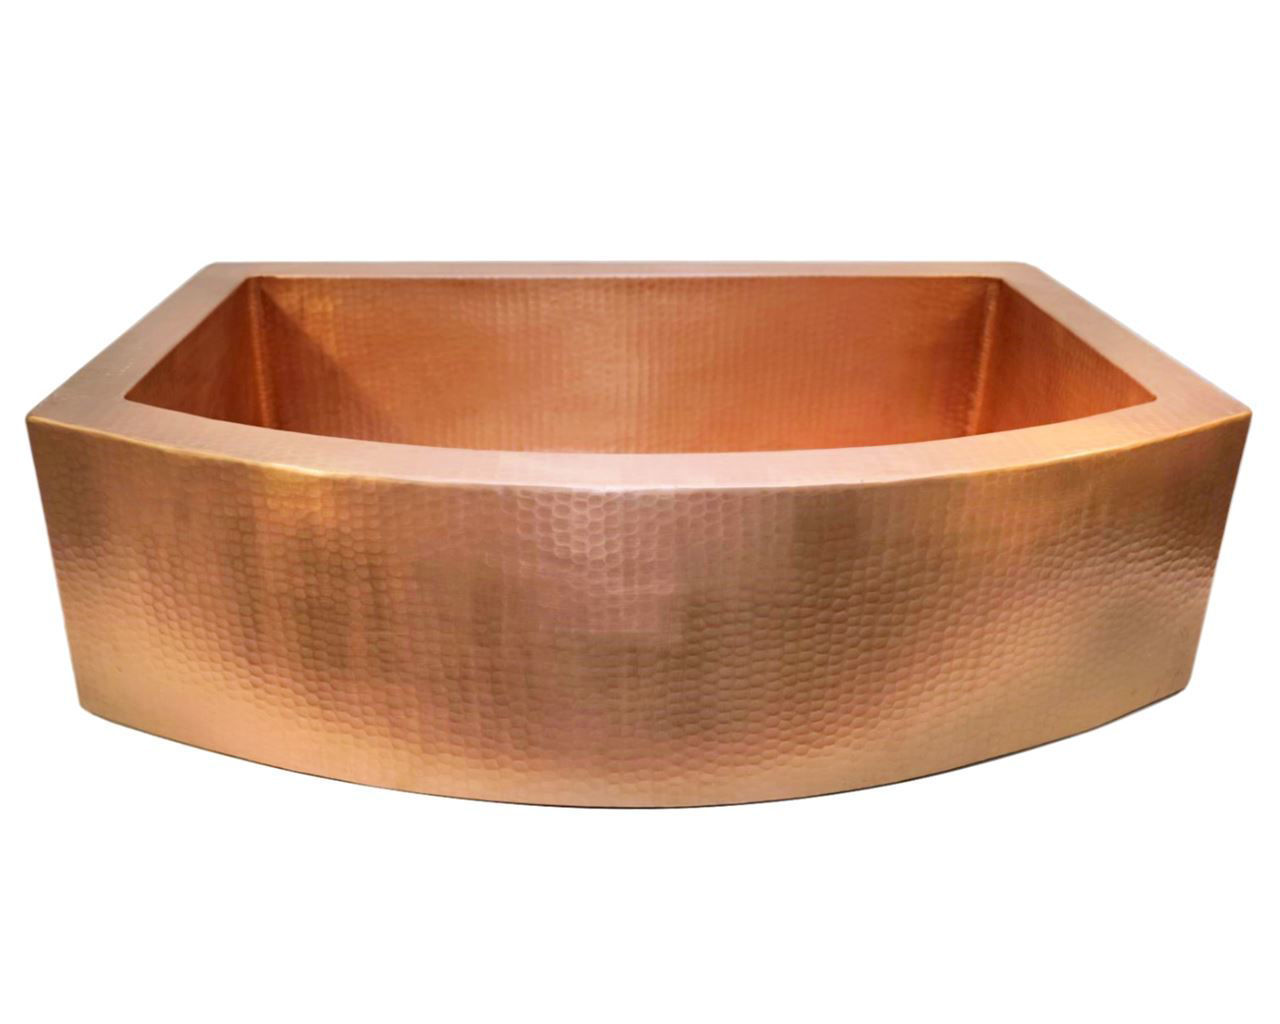 Rounded Front Single Well Copper Farmhouse Sink by SoLuna